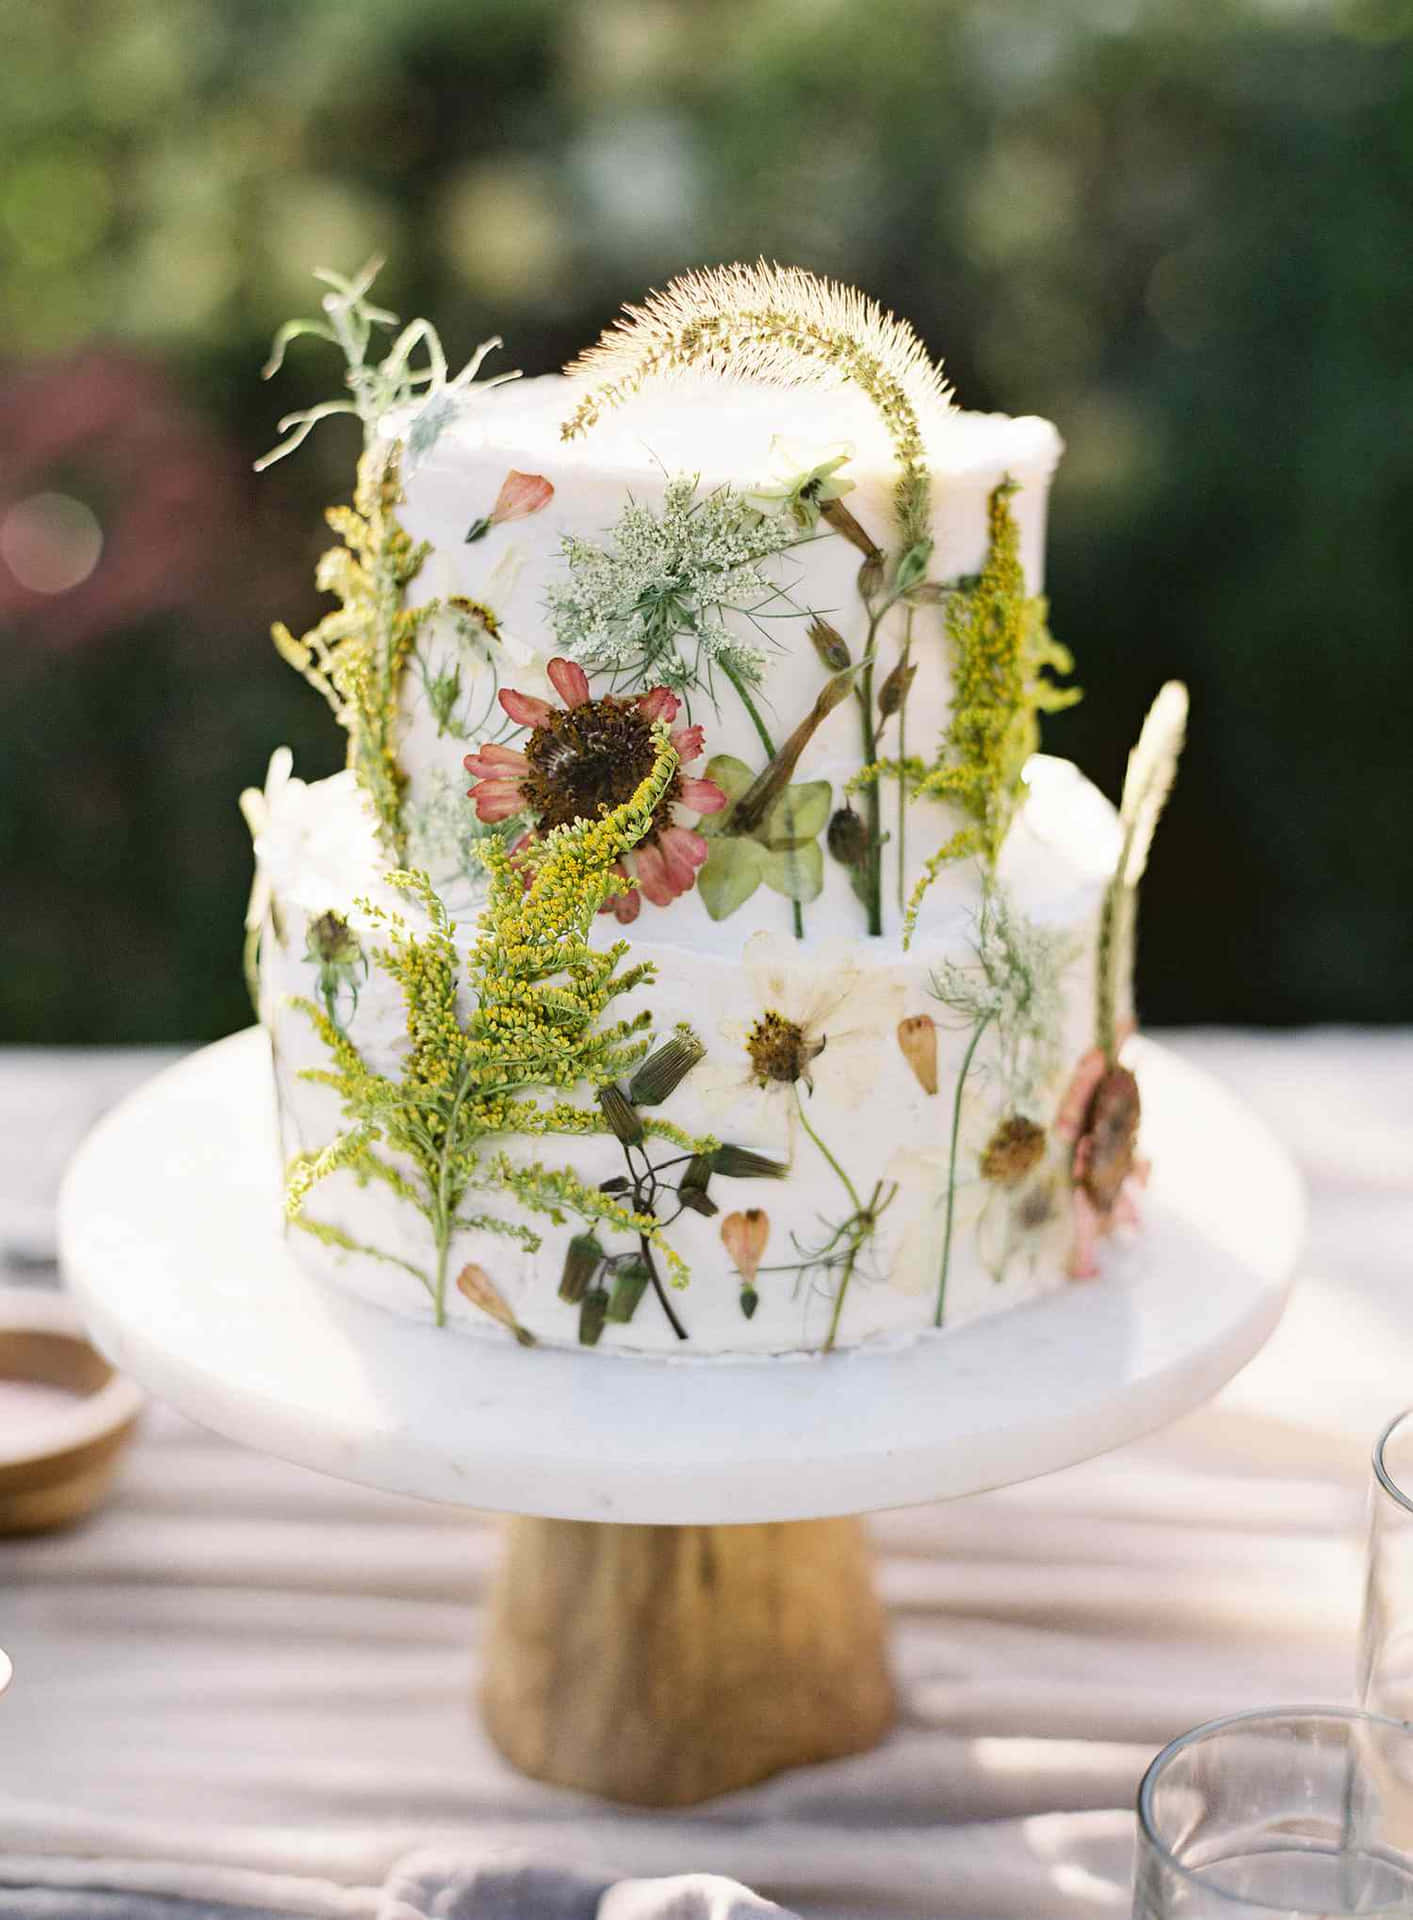 Captivating Floral Cake with Blooming Delicacies Wallpaper